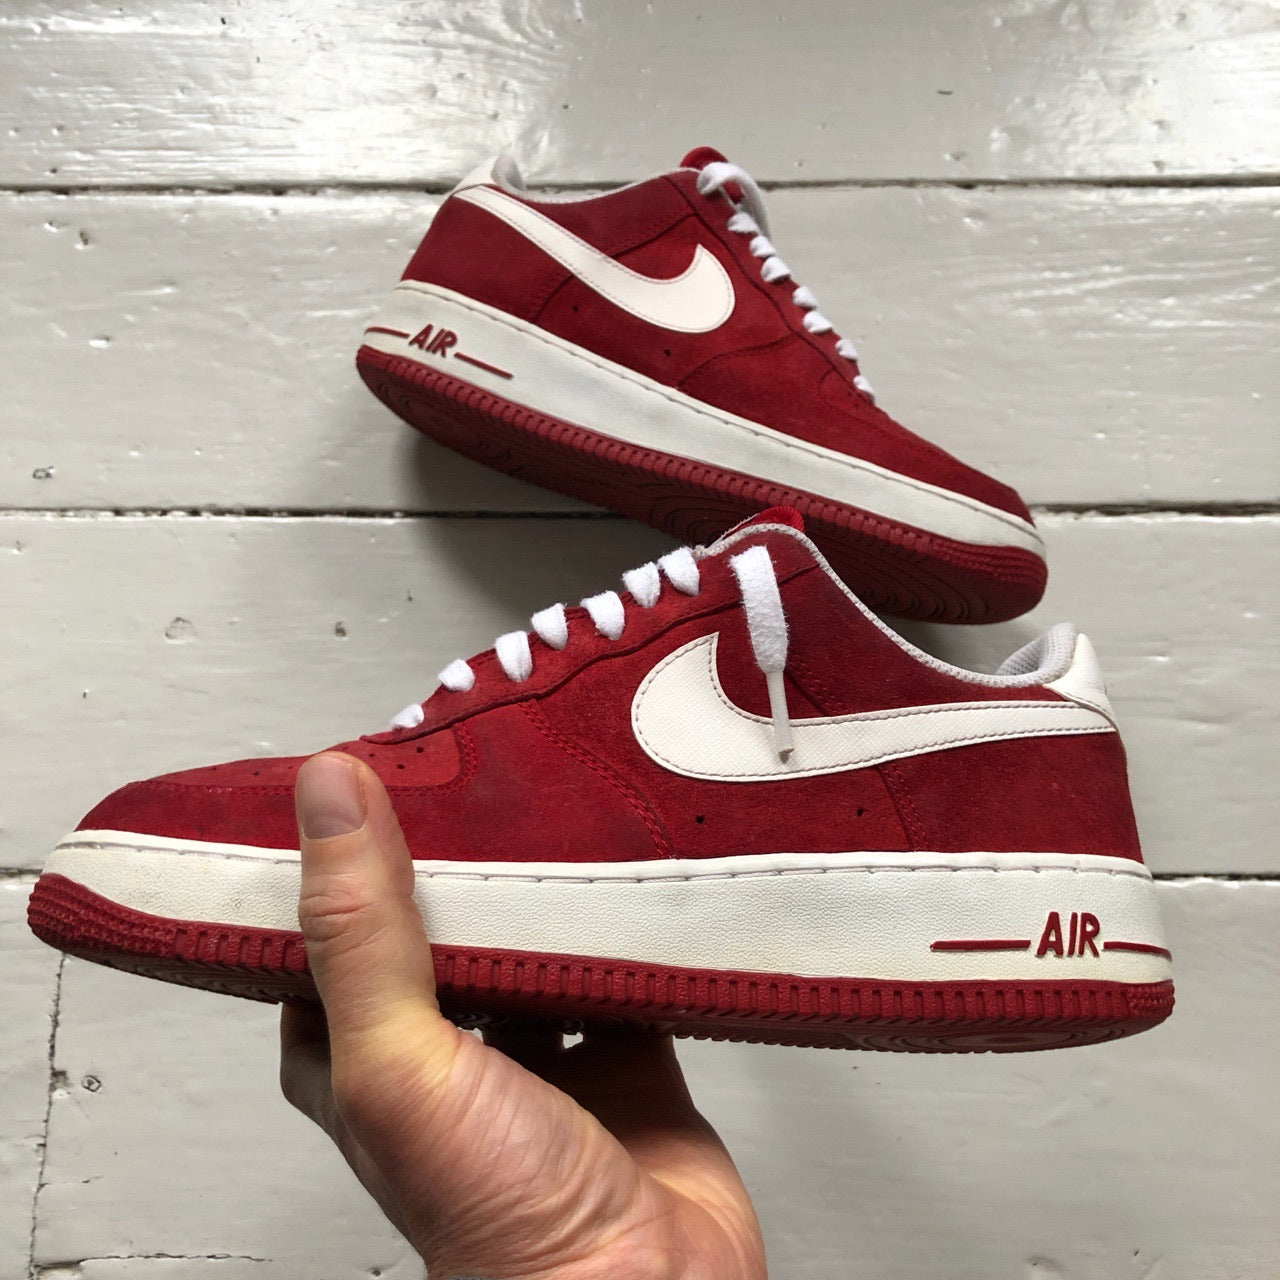 Nike Air Force 1 Red and White (UK 8)